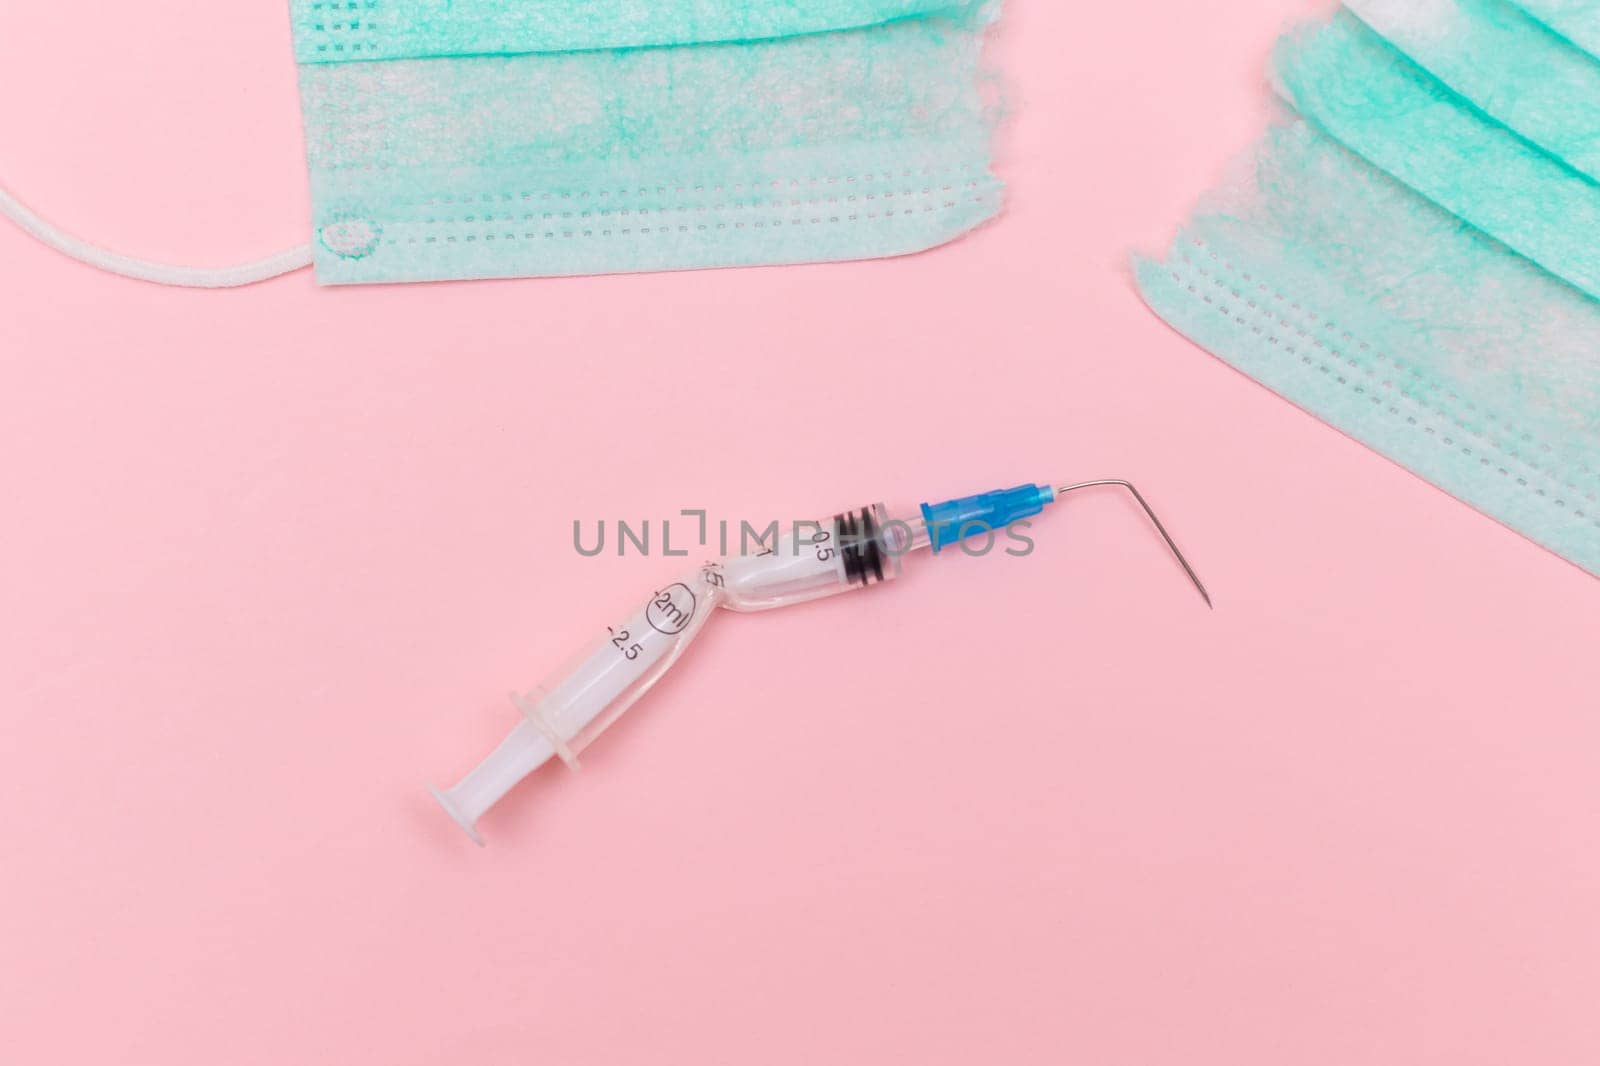 Anti Vaccine Movement and Anti Mask Concept - Broken Medical Syringe and Green Torn Medical Face Mask on the Pink Background. Pandemic and Lockdown End - Top View, Flat Lay